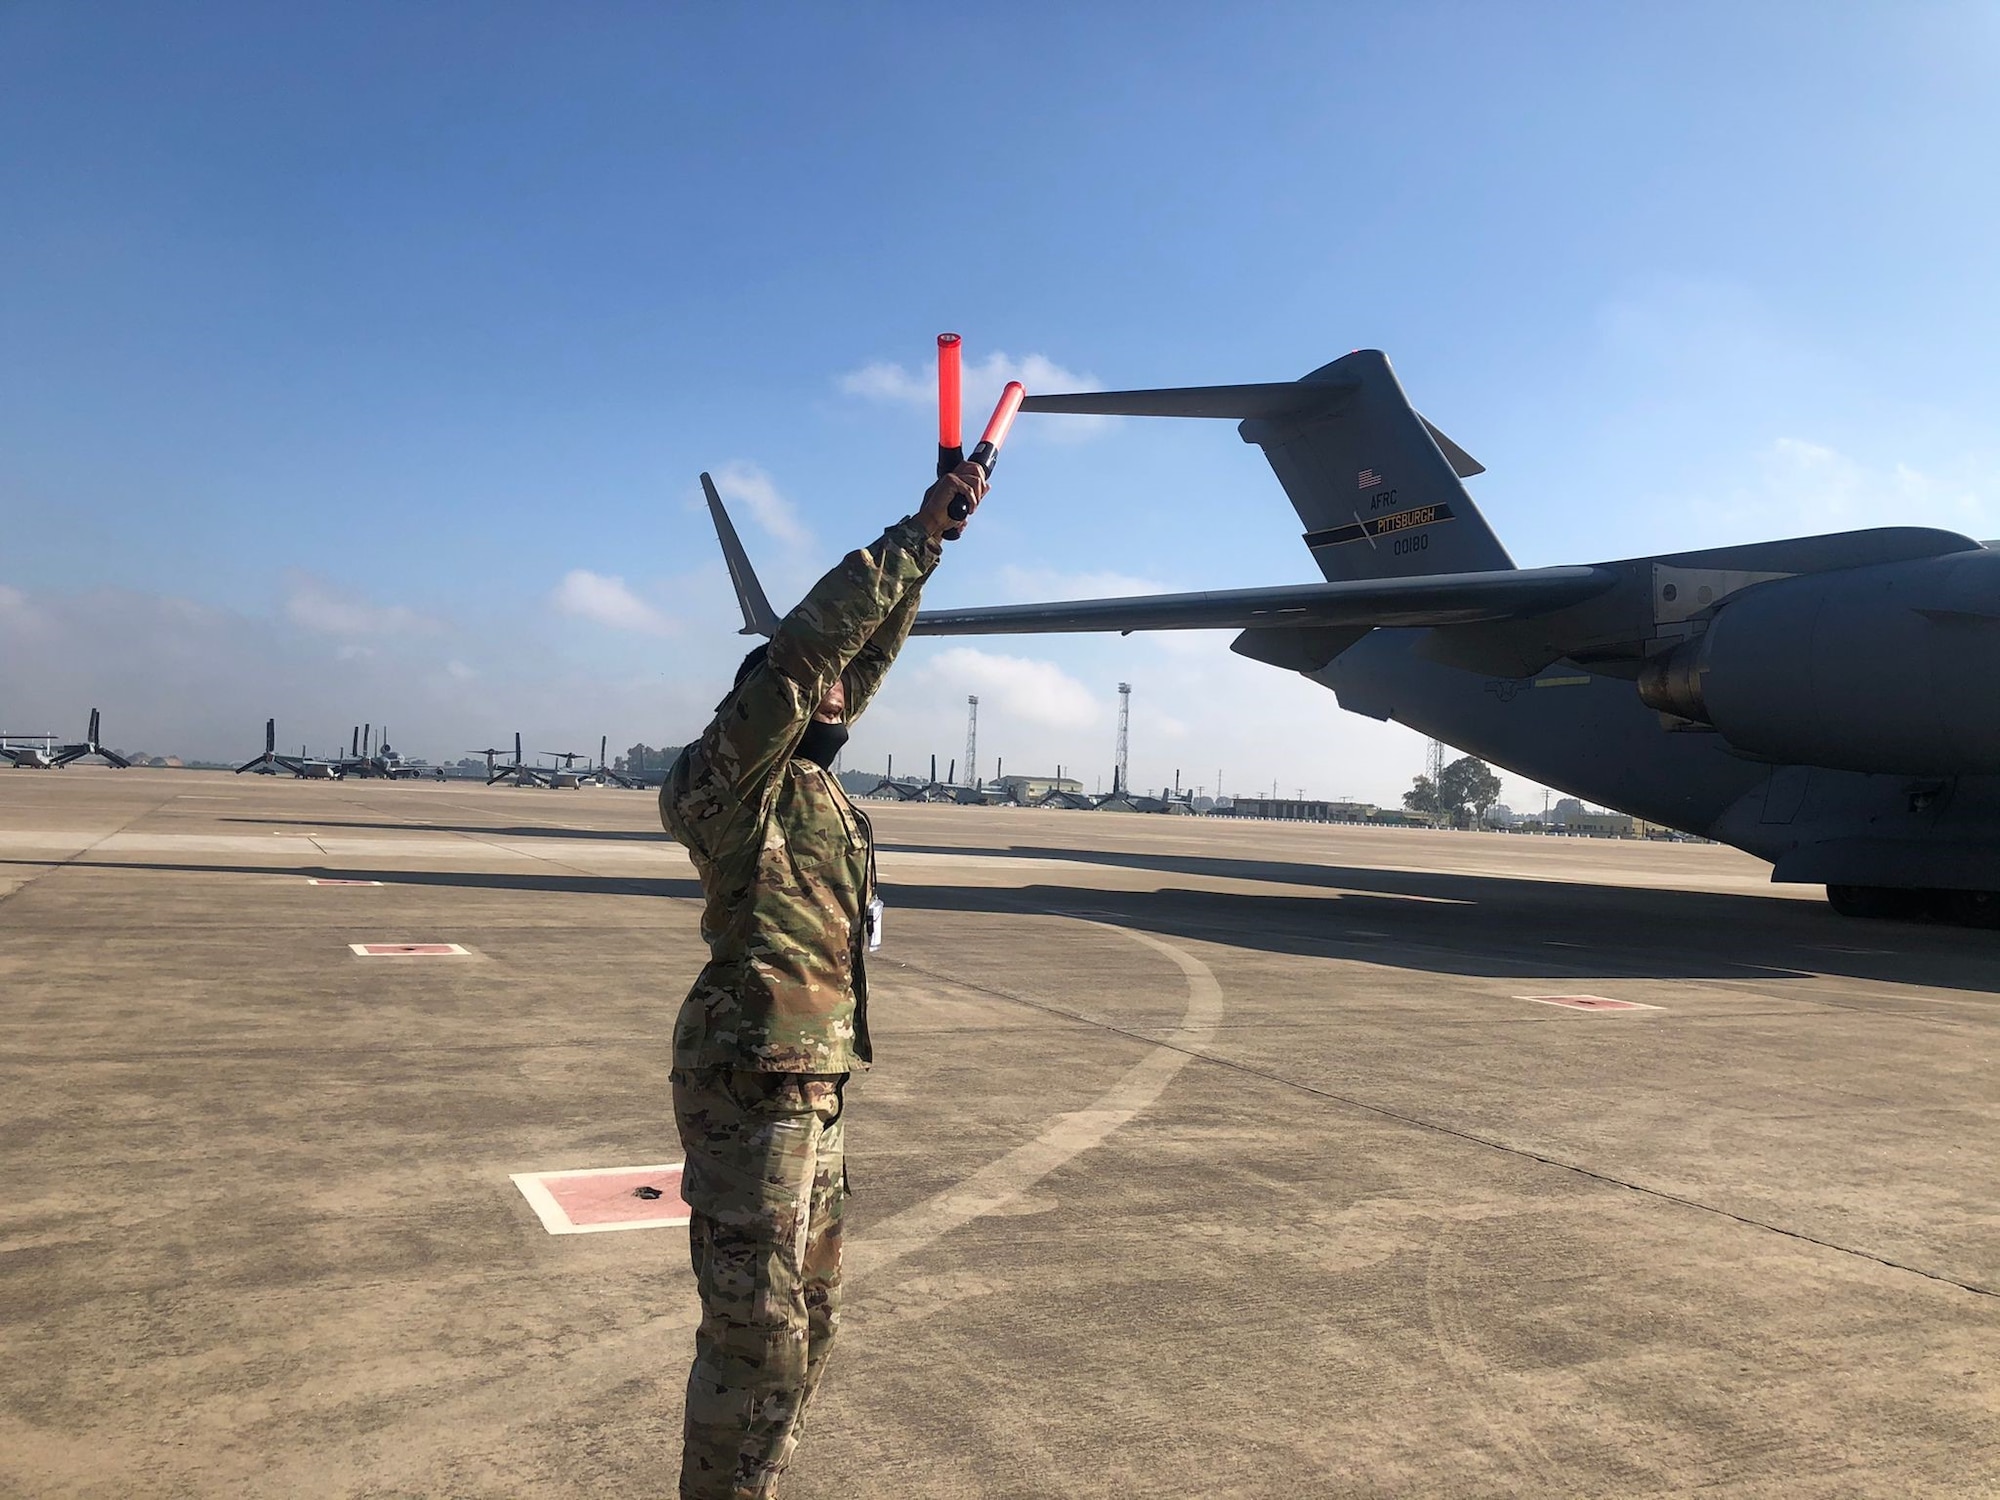 726th Air Mobility Squadron, Staff Sgt. Damien Cook halts a C-17 into parking position on his own, for the first time, after being trained by 725th Air Mobility Squadron maintainers at Morón Air Base, April 6, 2021. Since the beginning of March, Airmen of the 521st Air Mobility Operations Wing have been demonstrating the Wing’s Nodal Agile Combat Employment at the air base with a team of 21 Airmen. (U.S. Air Force photo by Staff Sgt. Michael Dodd)